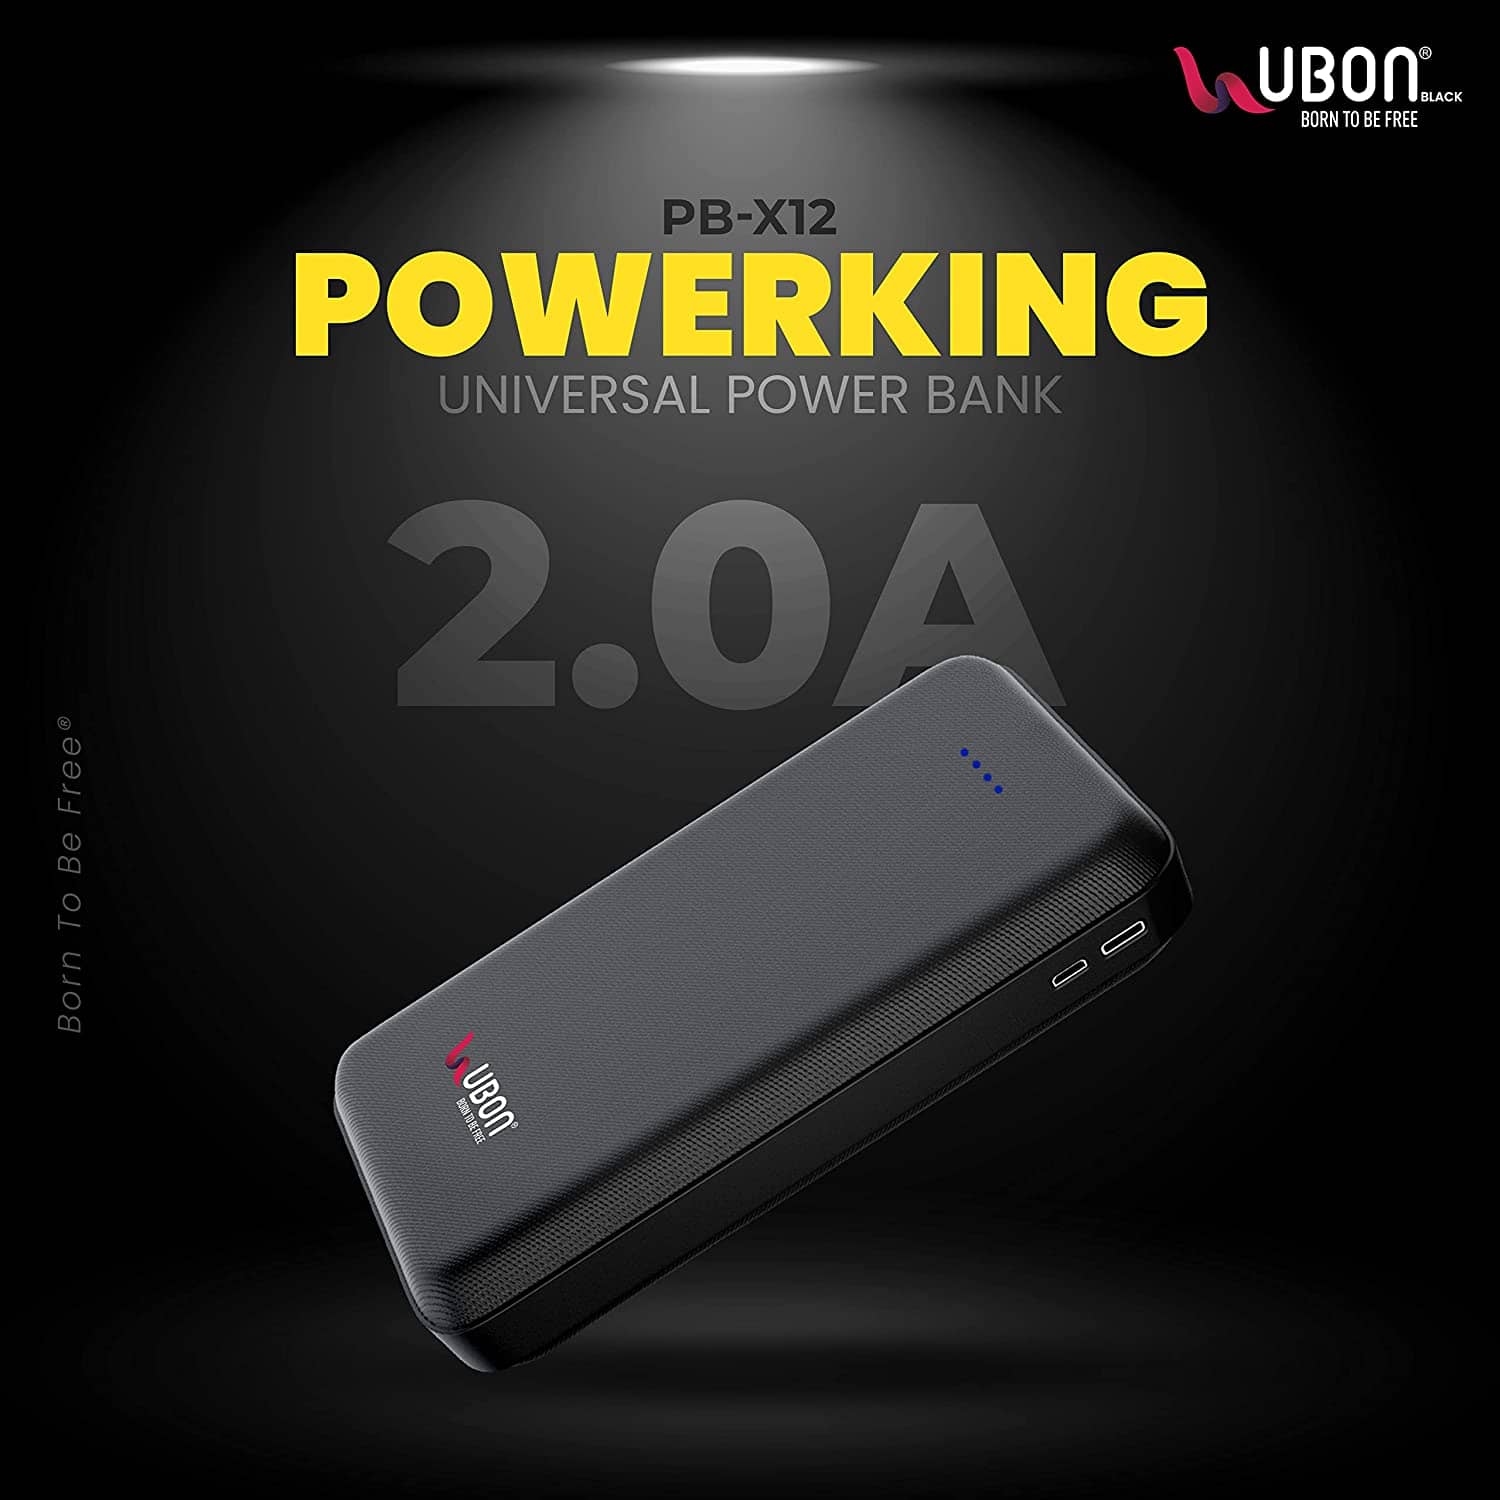 UBON PB-X12 Power King, 10000mAh Li-Polymer 10W Power Bank with 2.0A  Inbuilt 3 in 1 Micro USB, Type-C & Lightning Cables, Proudly Made in India,  Universal Compatibility (Black) - QualiCorp Gifts Services